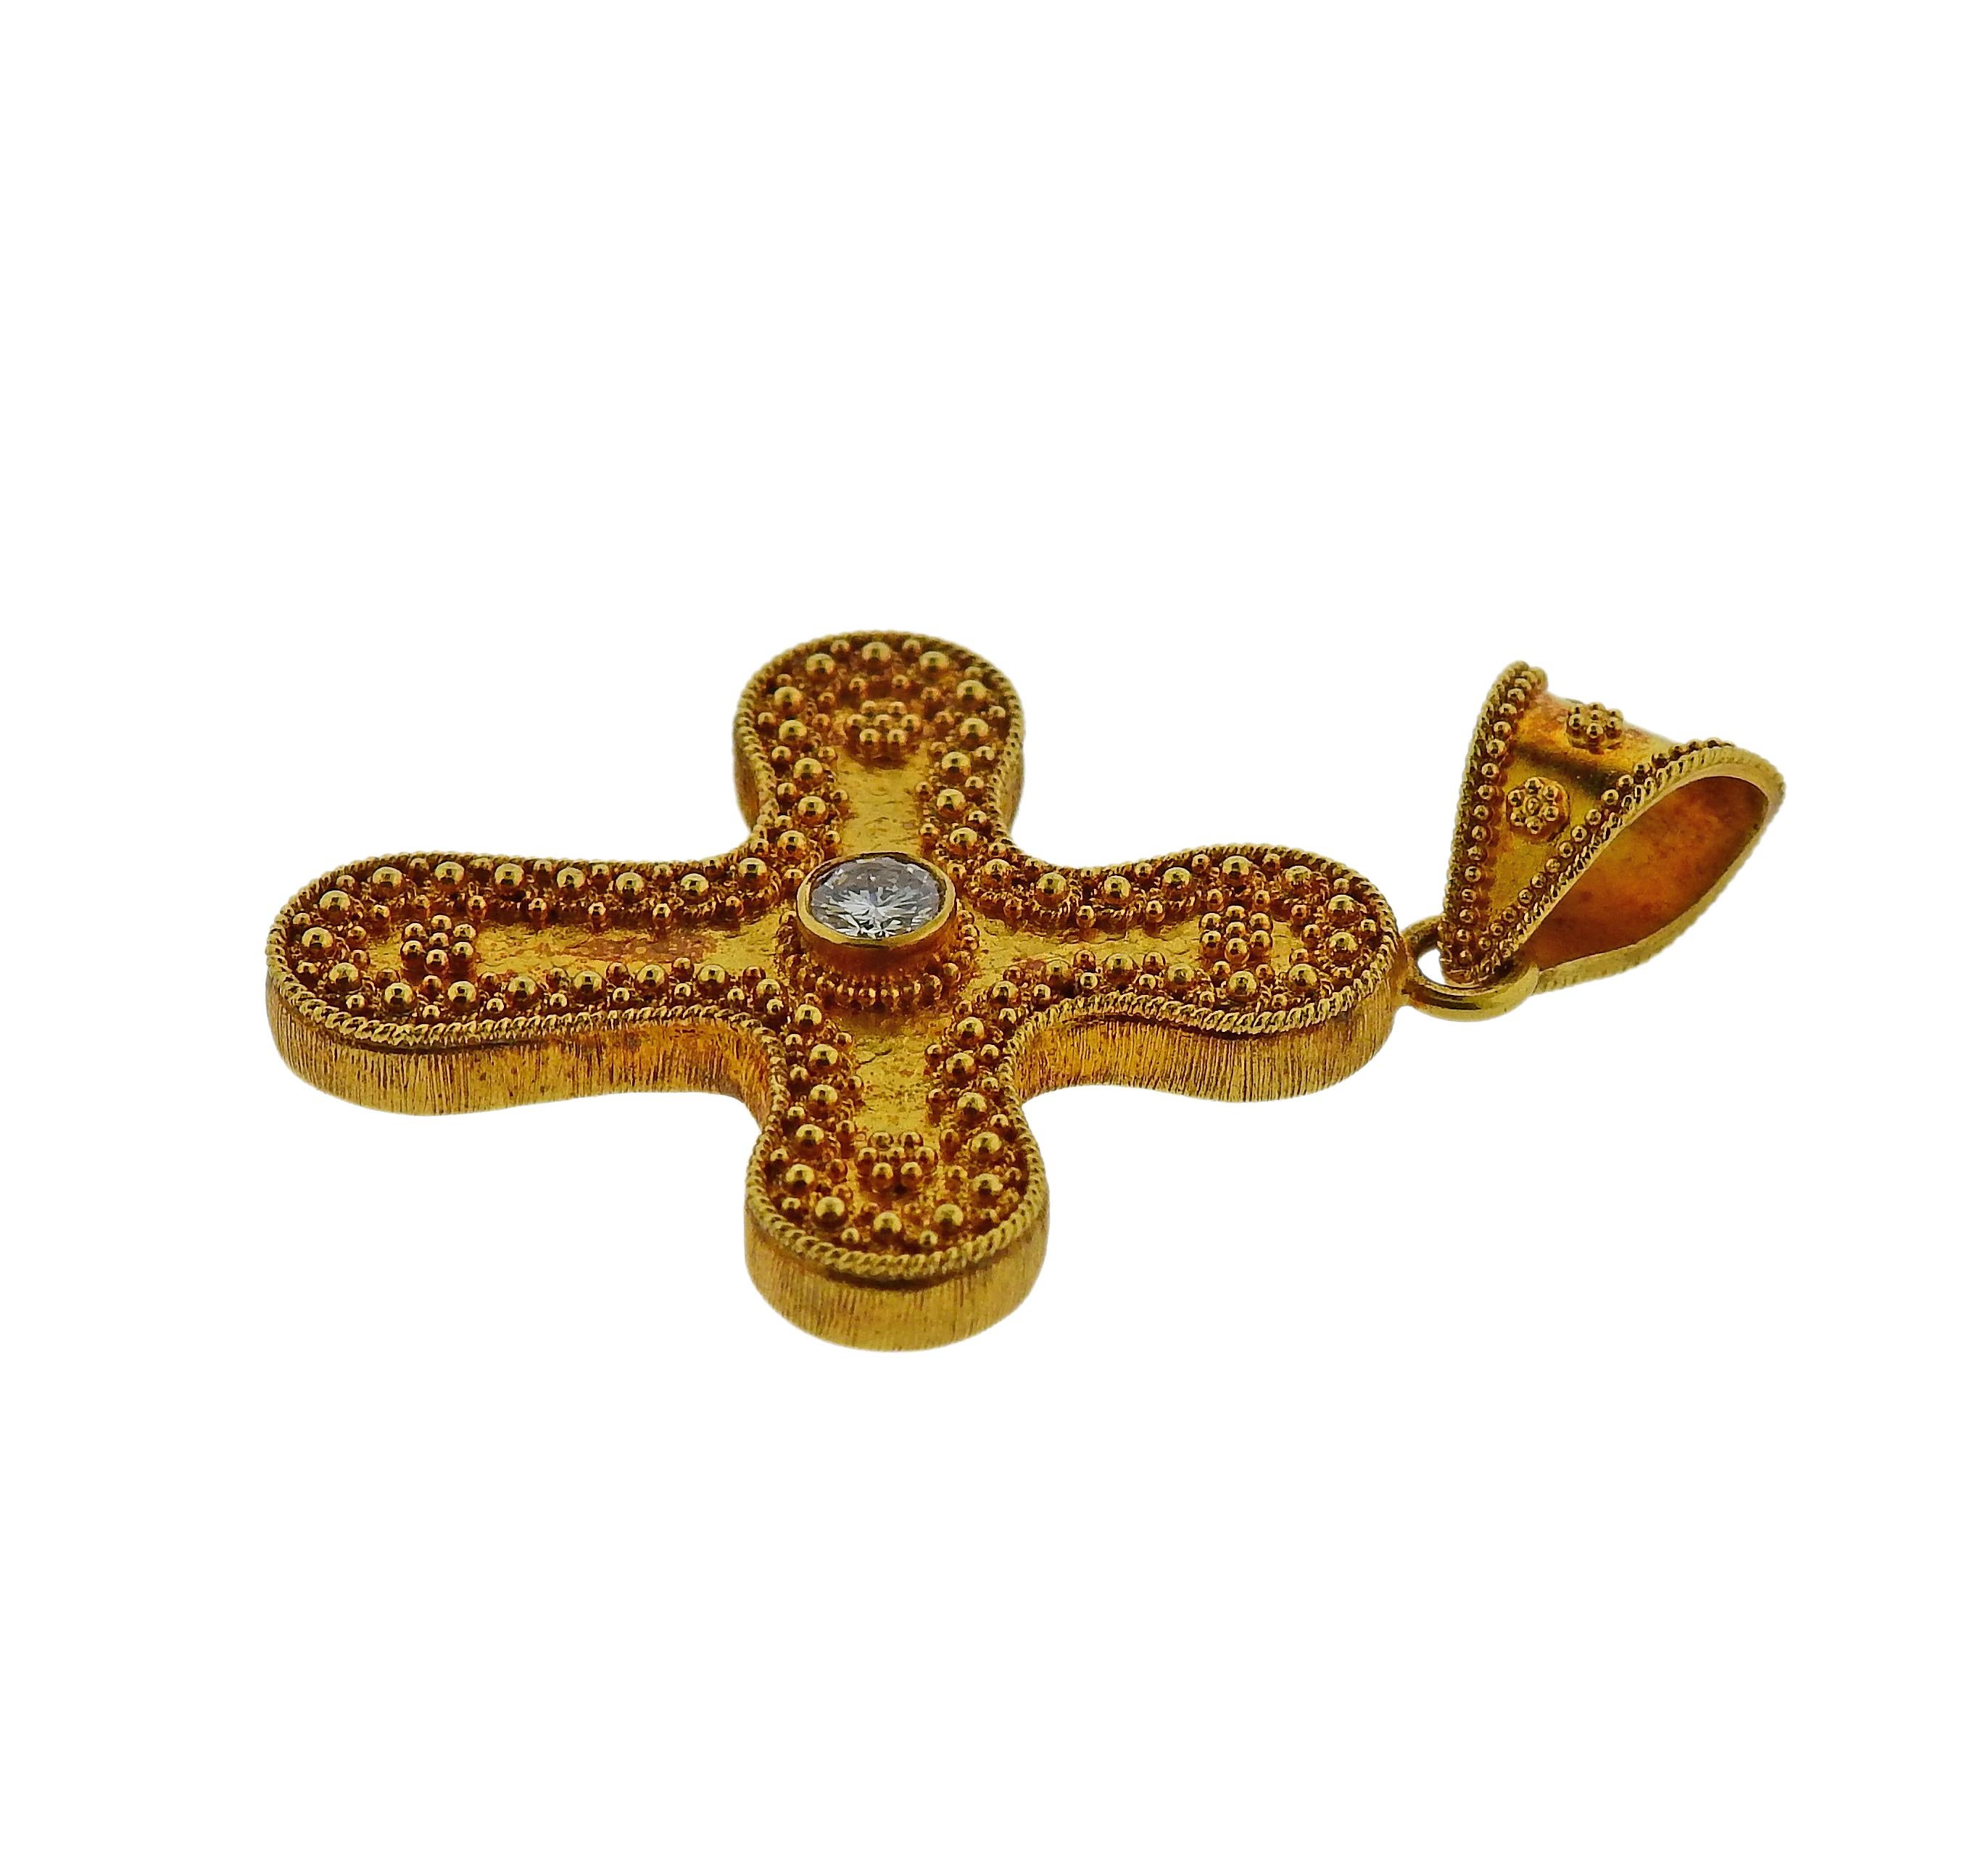 18k yellow gold cross pendant by Greek designer Lalaounis, set with an approx. 0.22ct H/VS diamond in the center. Pendant measures 45mm long with bale x 30mm. Weight is 10.7 grams. Marked 750, Greece, Maker's mark. 